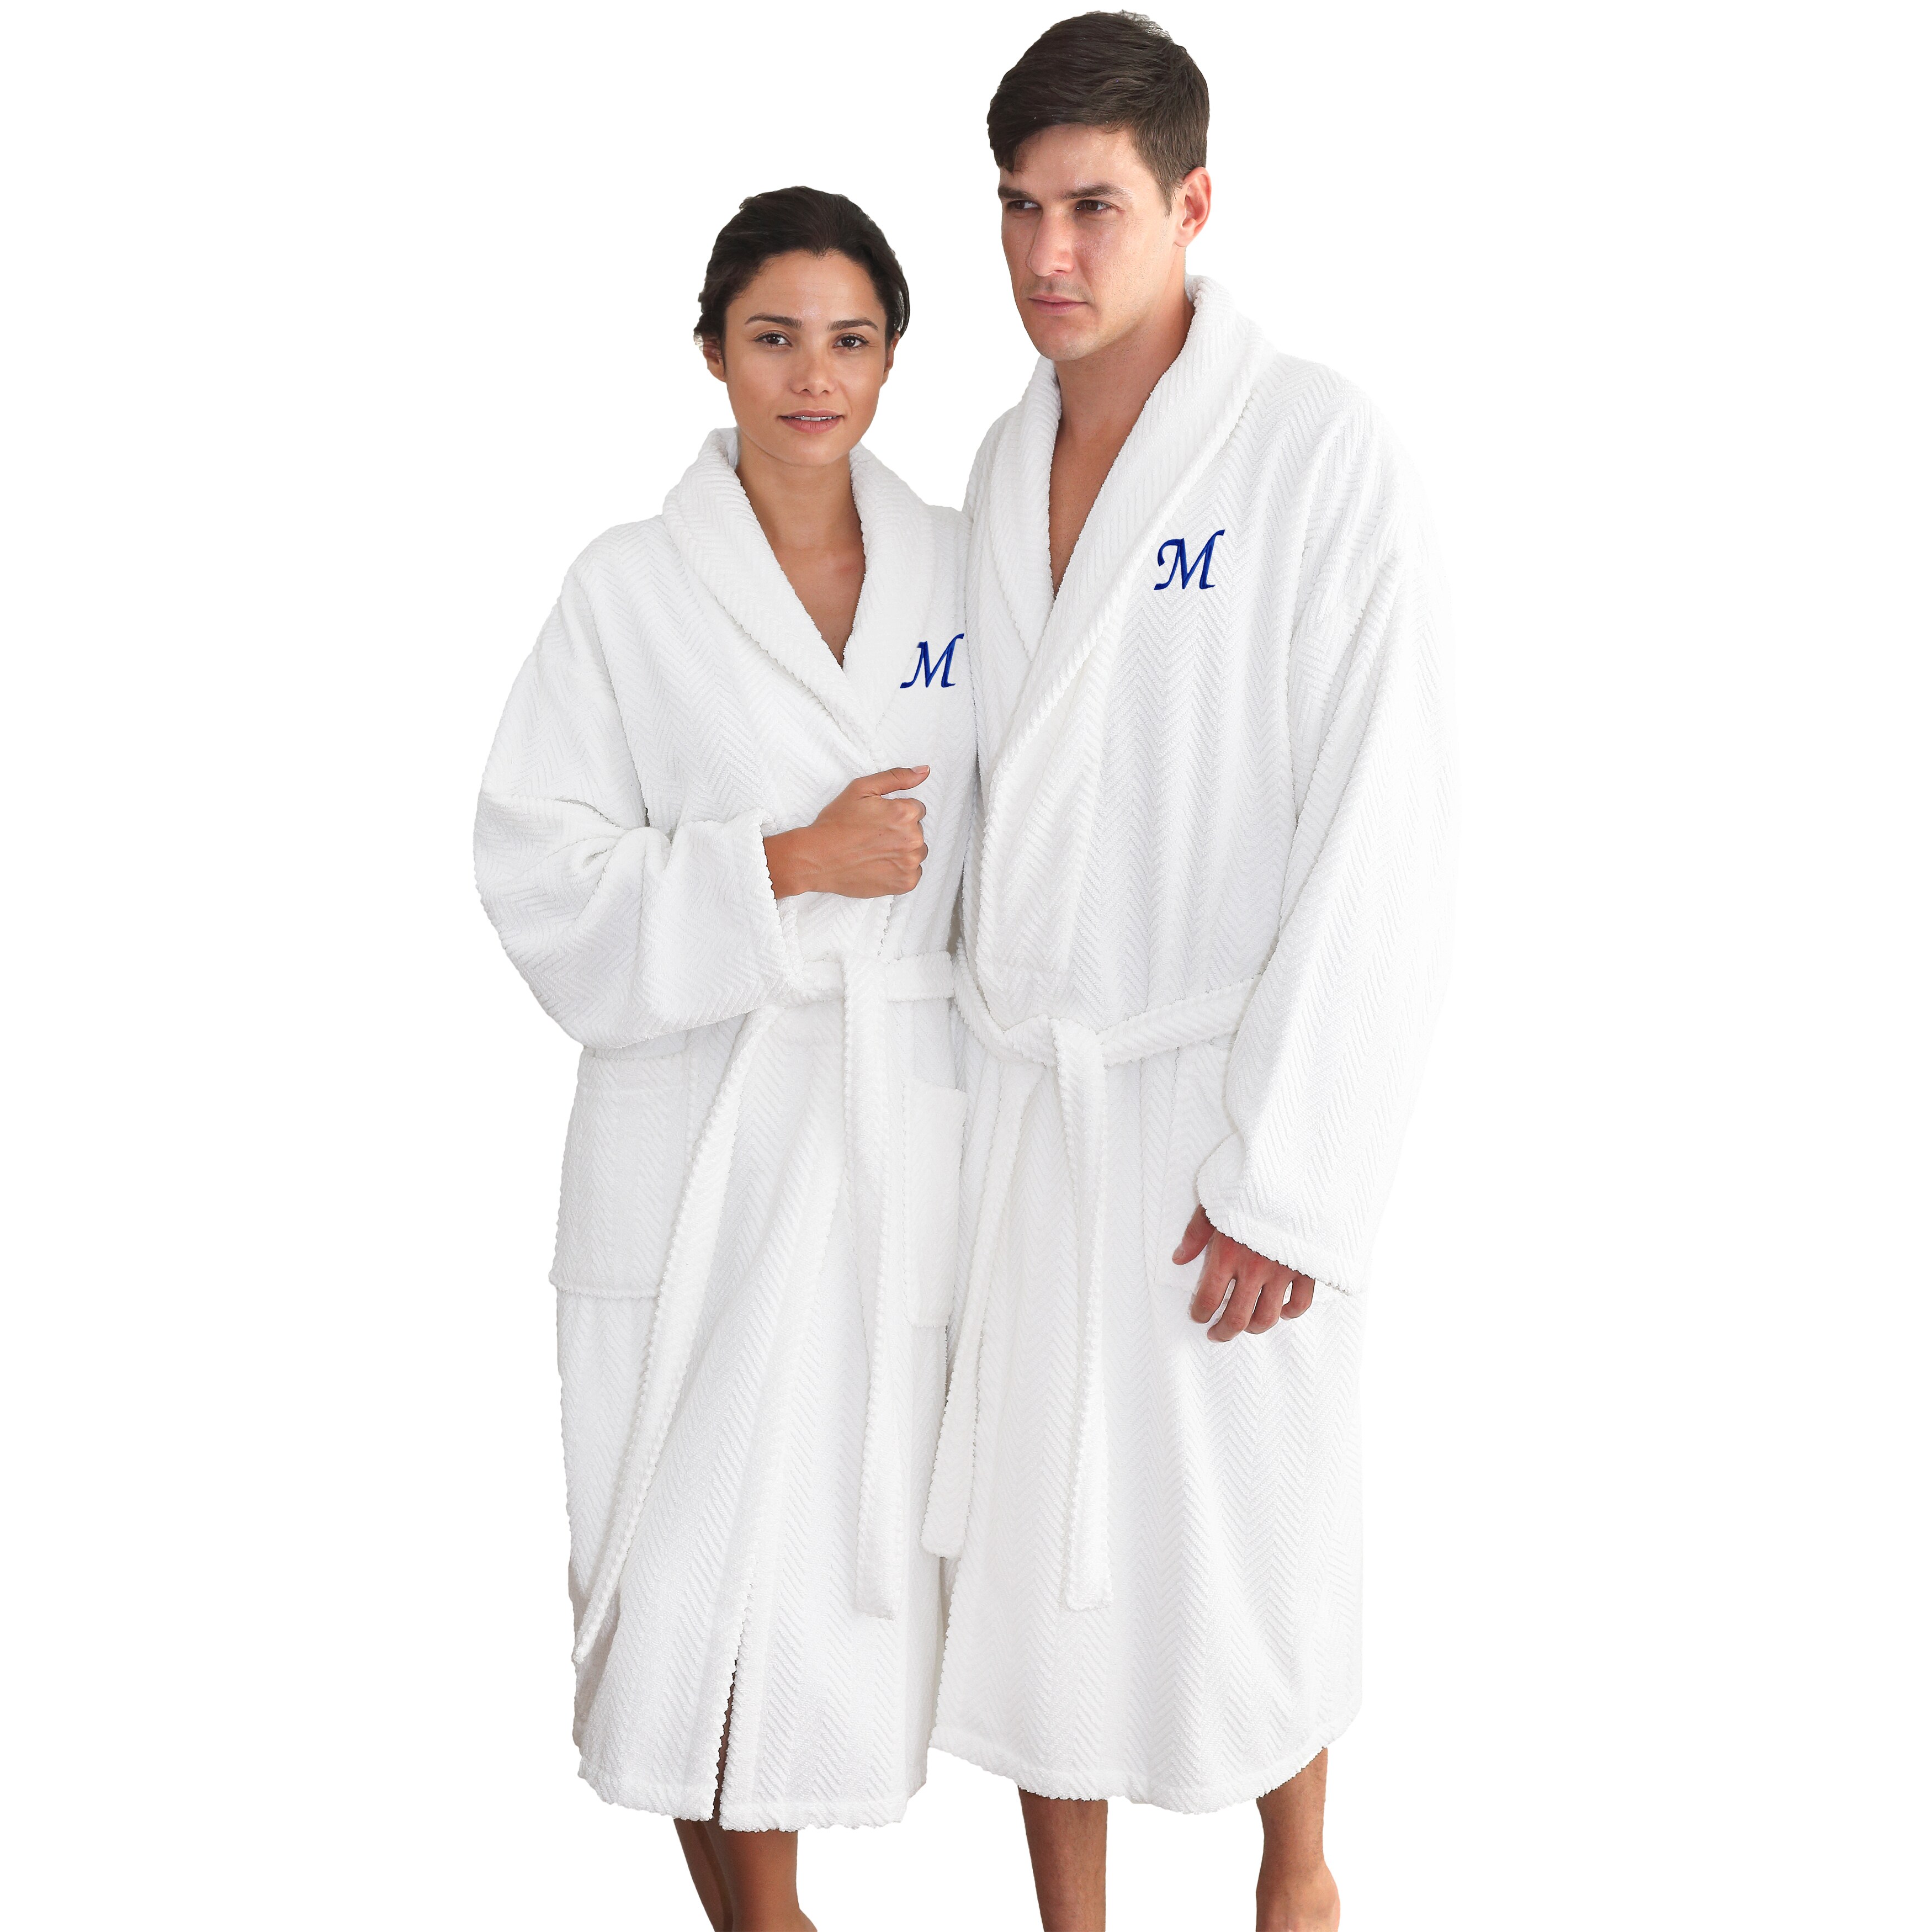 https://ak1.ostkcdn.com/images/products/12511752/Authentic-Hotel-and-Spa-White-with-Royal-Blue-Monogrammed-Herringbone-Weave-Turkish-Cotton-Unisex-Bath-Robe-2582d600-06fc-405d-8185-c6c15820560f.jpg